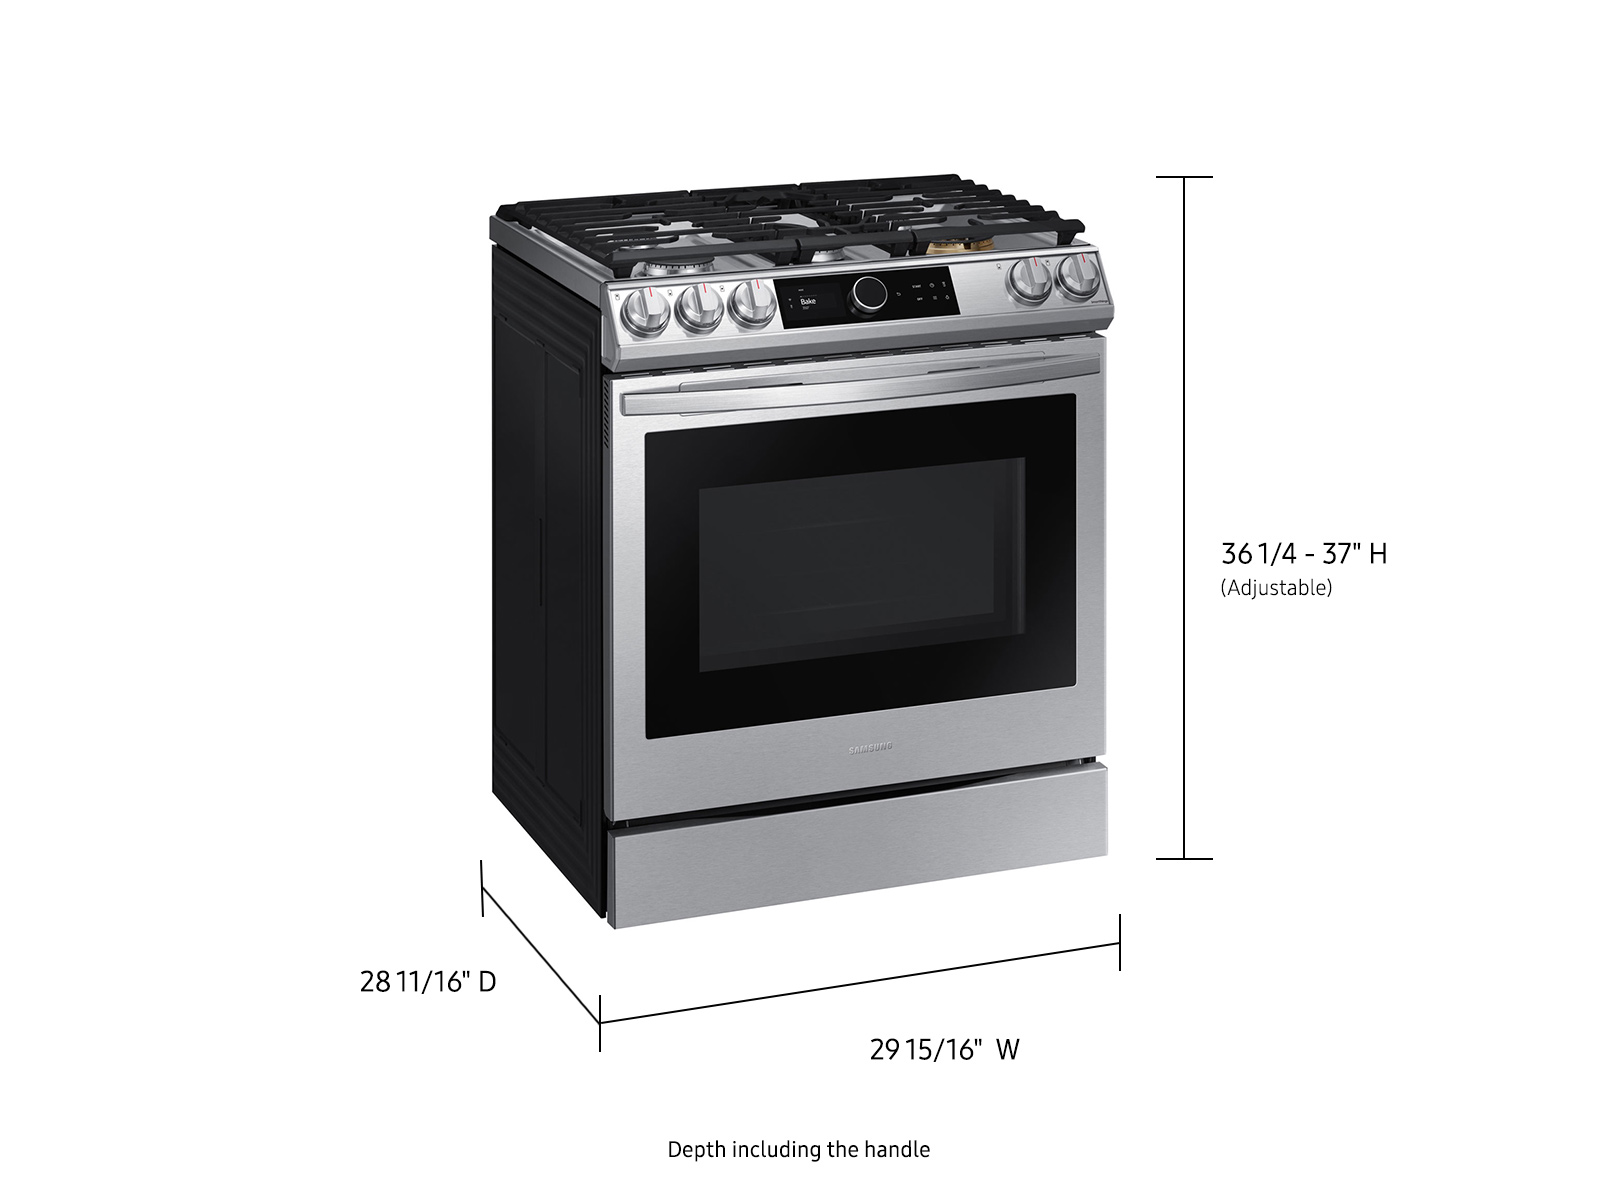 Thumbnail image of 6.0 cu ft. Smart Slide-in Gas Range with Smart Dial & Air Fry in Stainless Steel